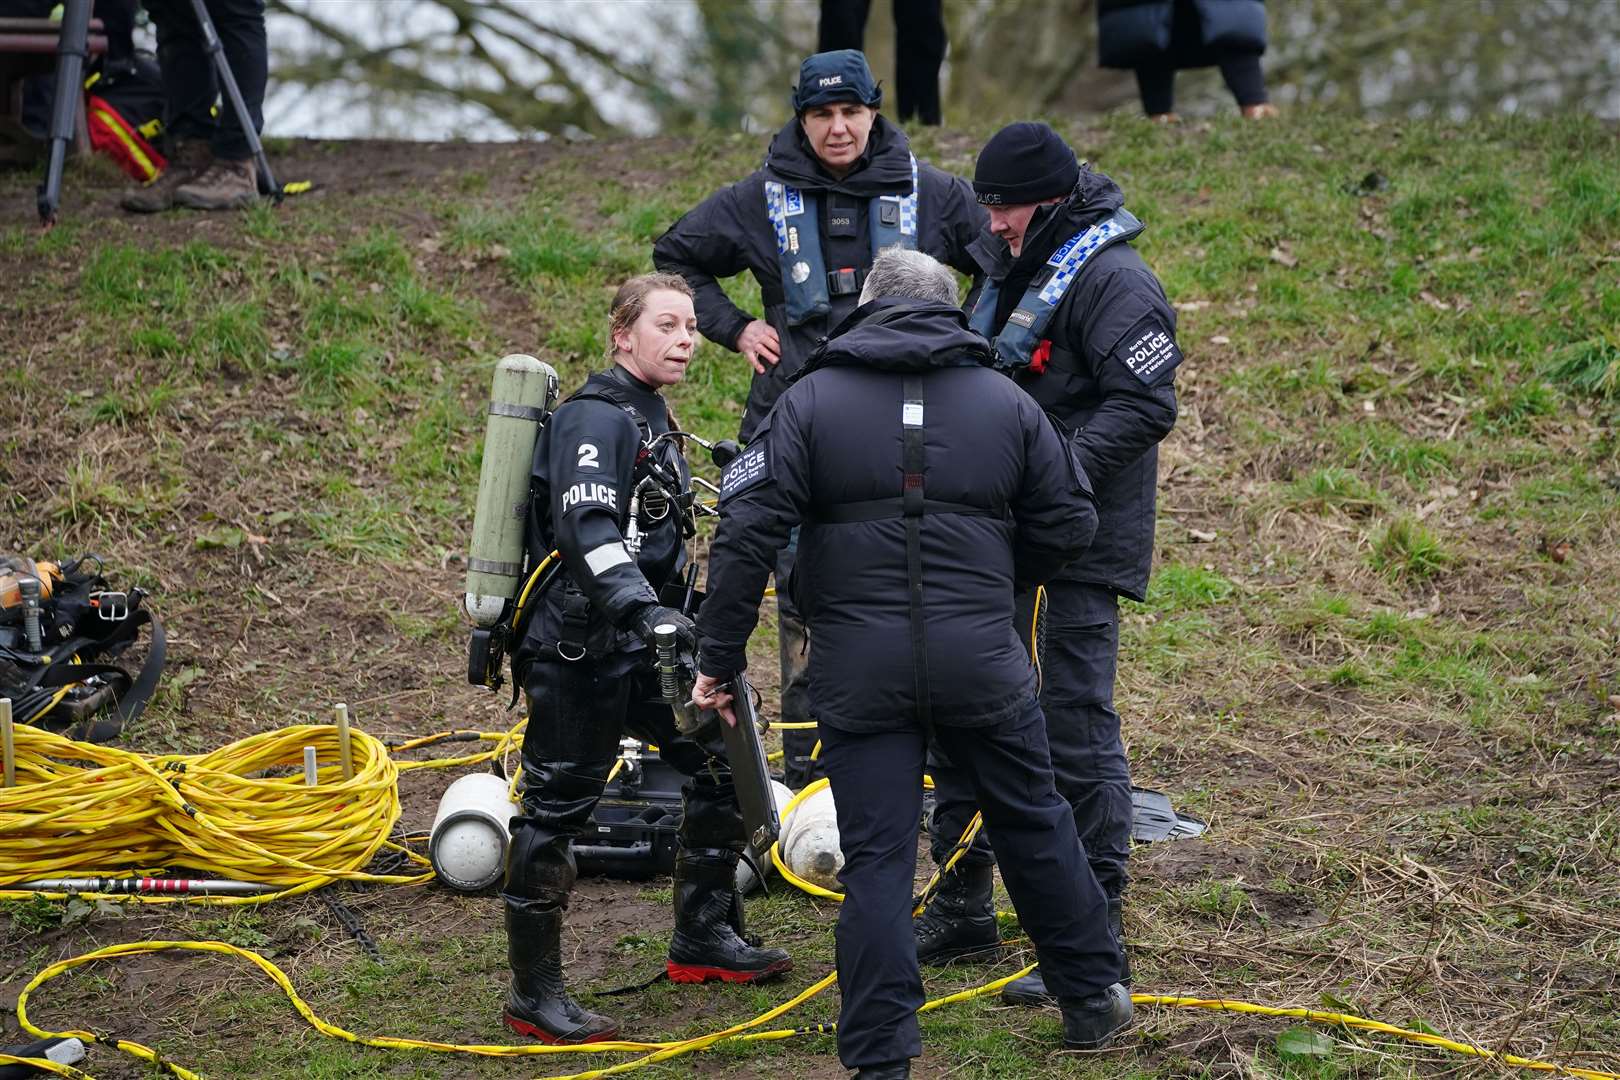 Specialist search teams from Lancashire Police on the banks of the River Wyre (Peter Byrne/PA)